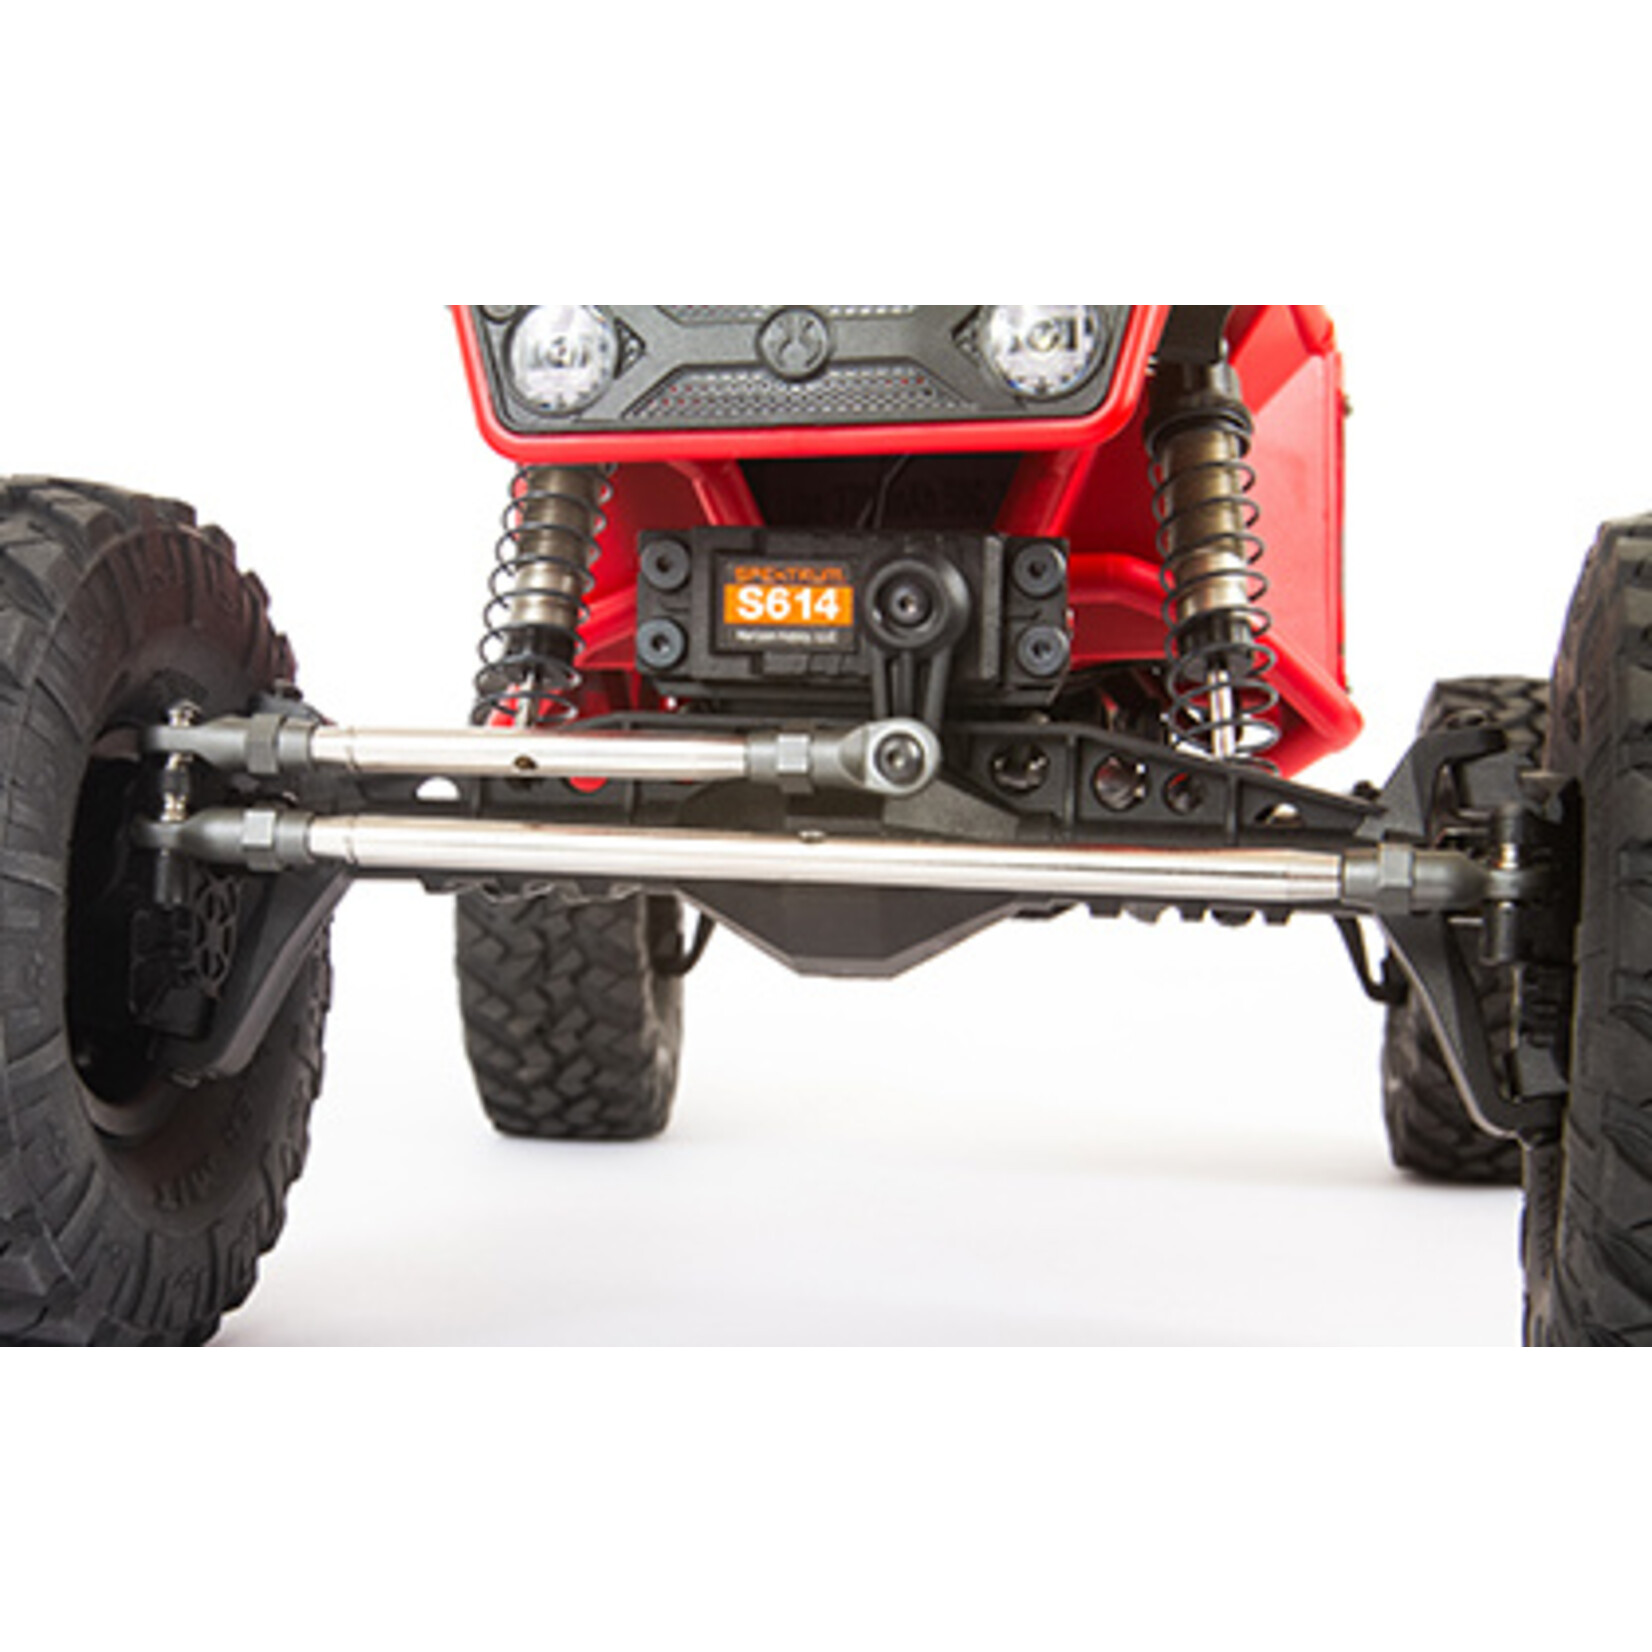 Axial 1/10 Capra 1.9 4WS Unlimited Trail Buggy RTR, Black